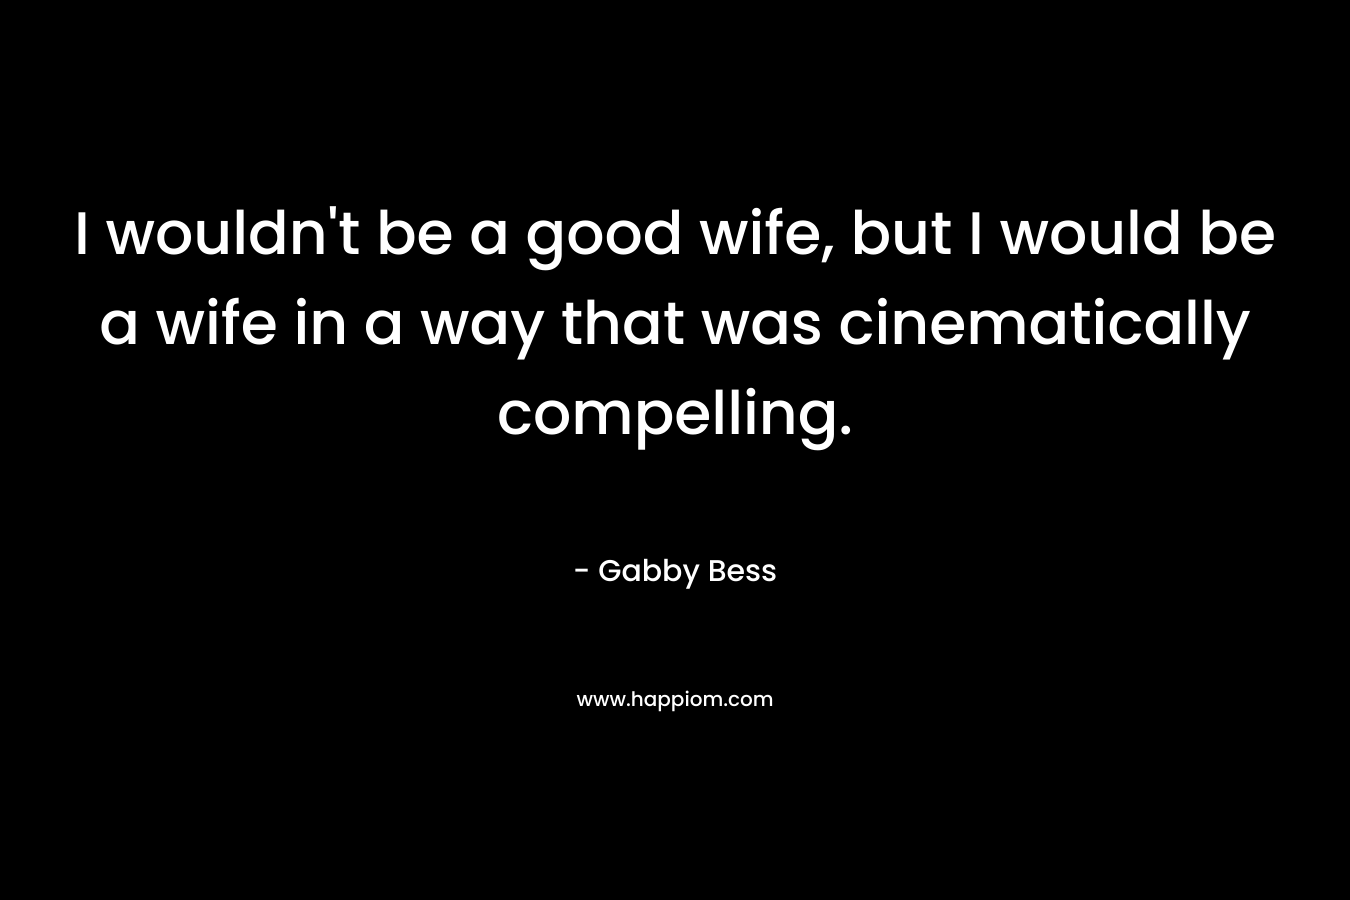 I wouldn't be a good wife, but I would be a wife in a way that was cinematically compelling.